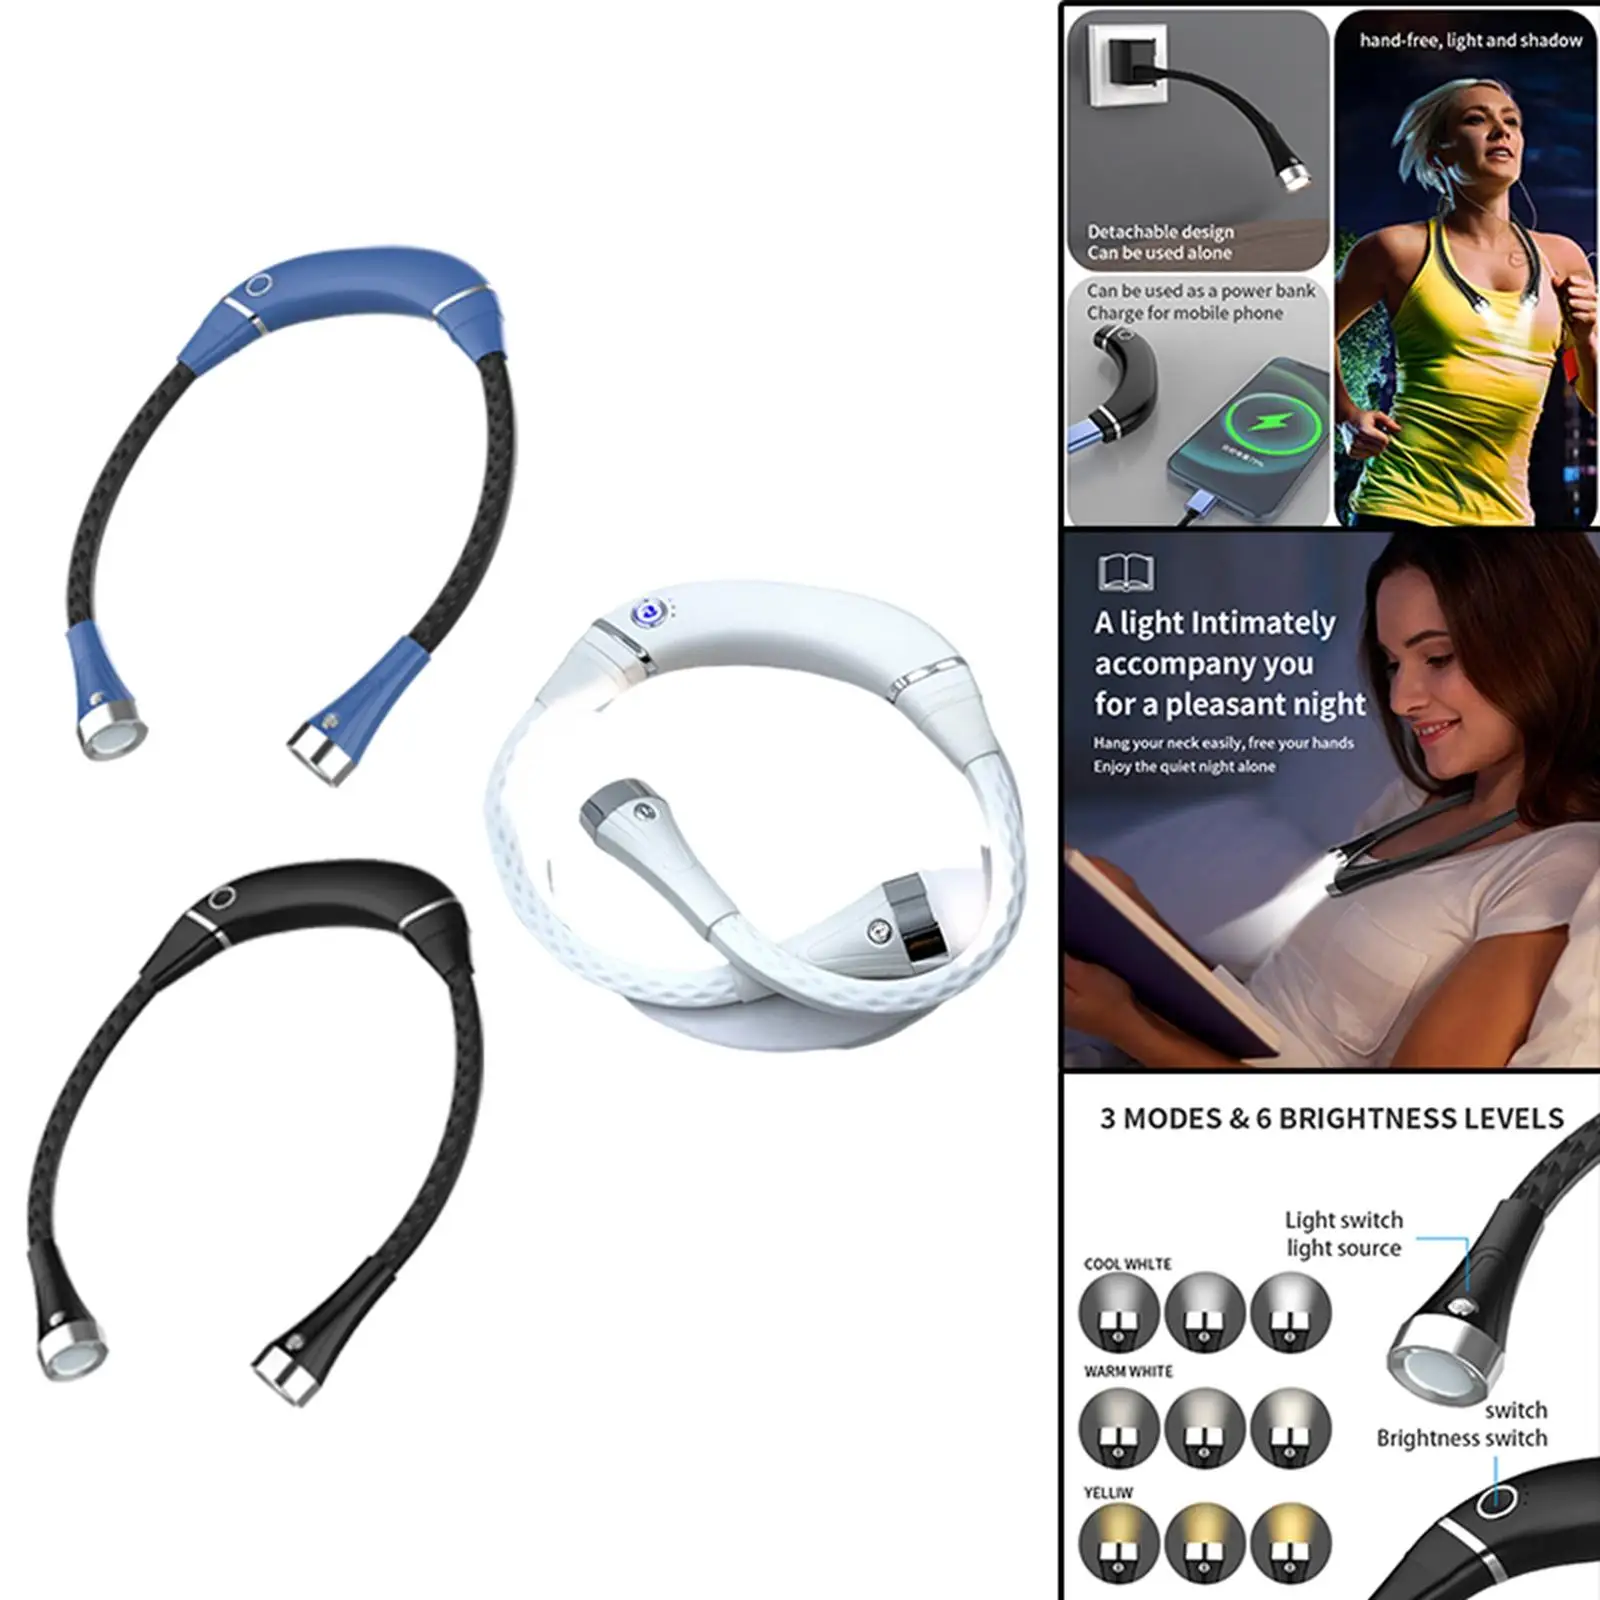 Neck Book Light USB Rechargeable 3 Level Neck Hung Lights for Running Sports Travel